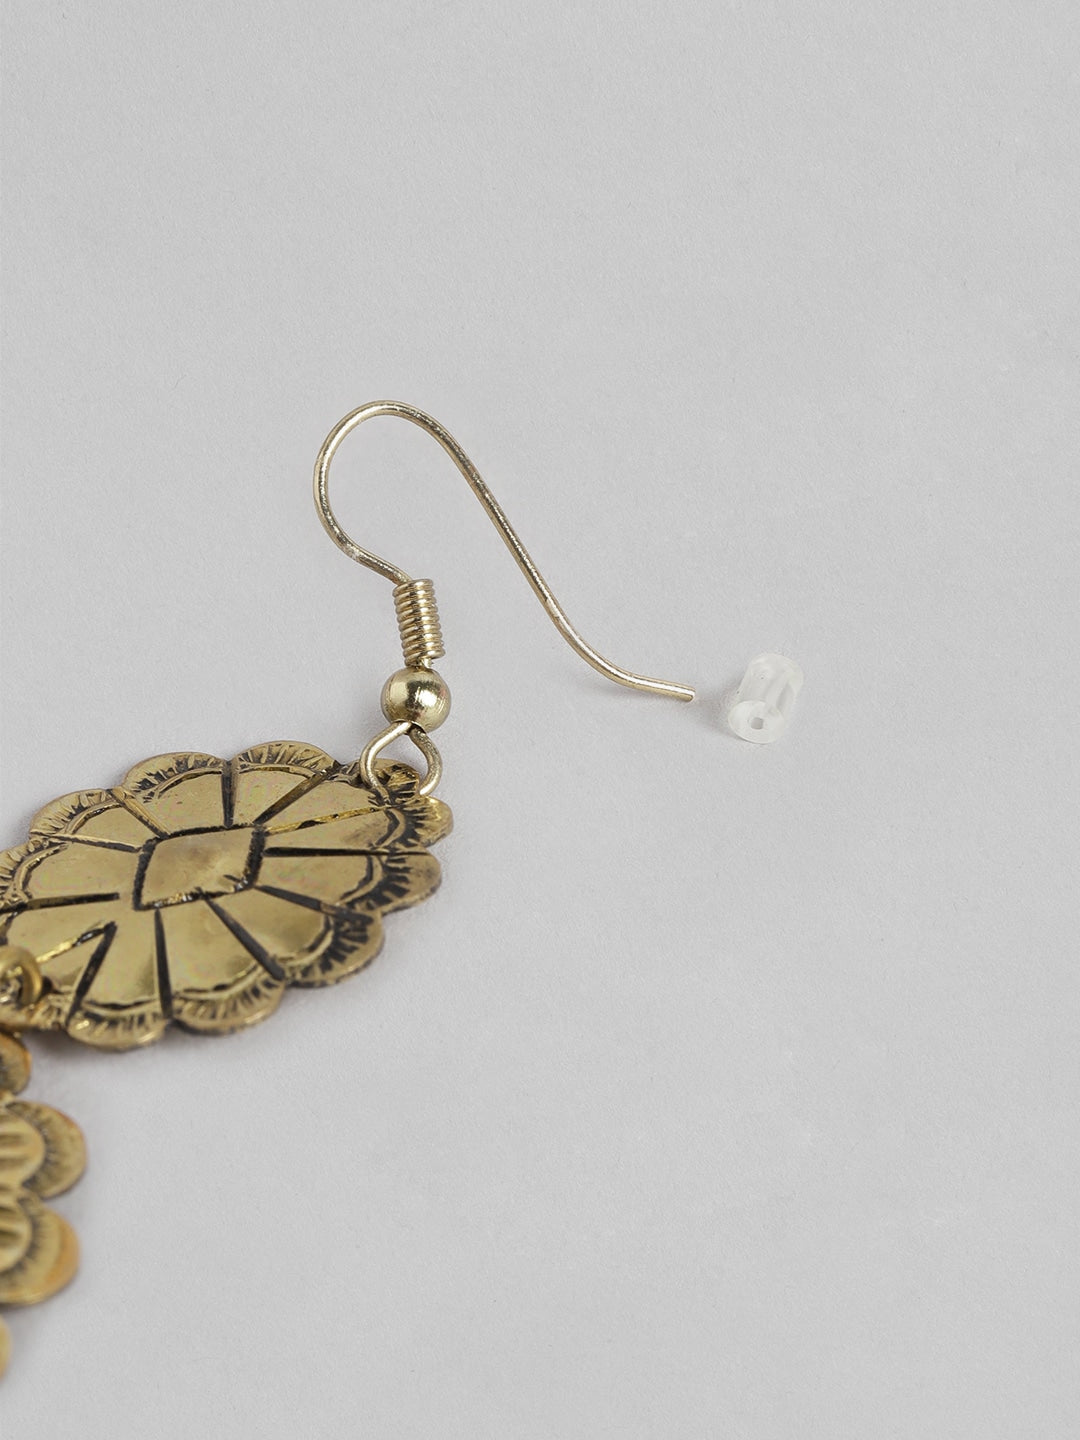 RICHEERA Gold-Plated Floral Drop Earrings